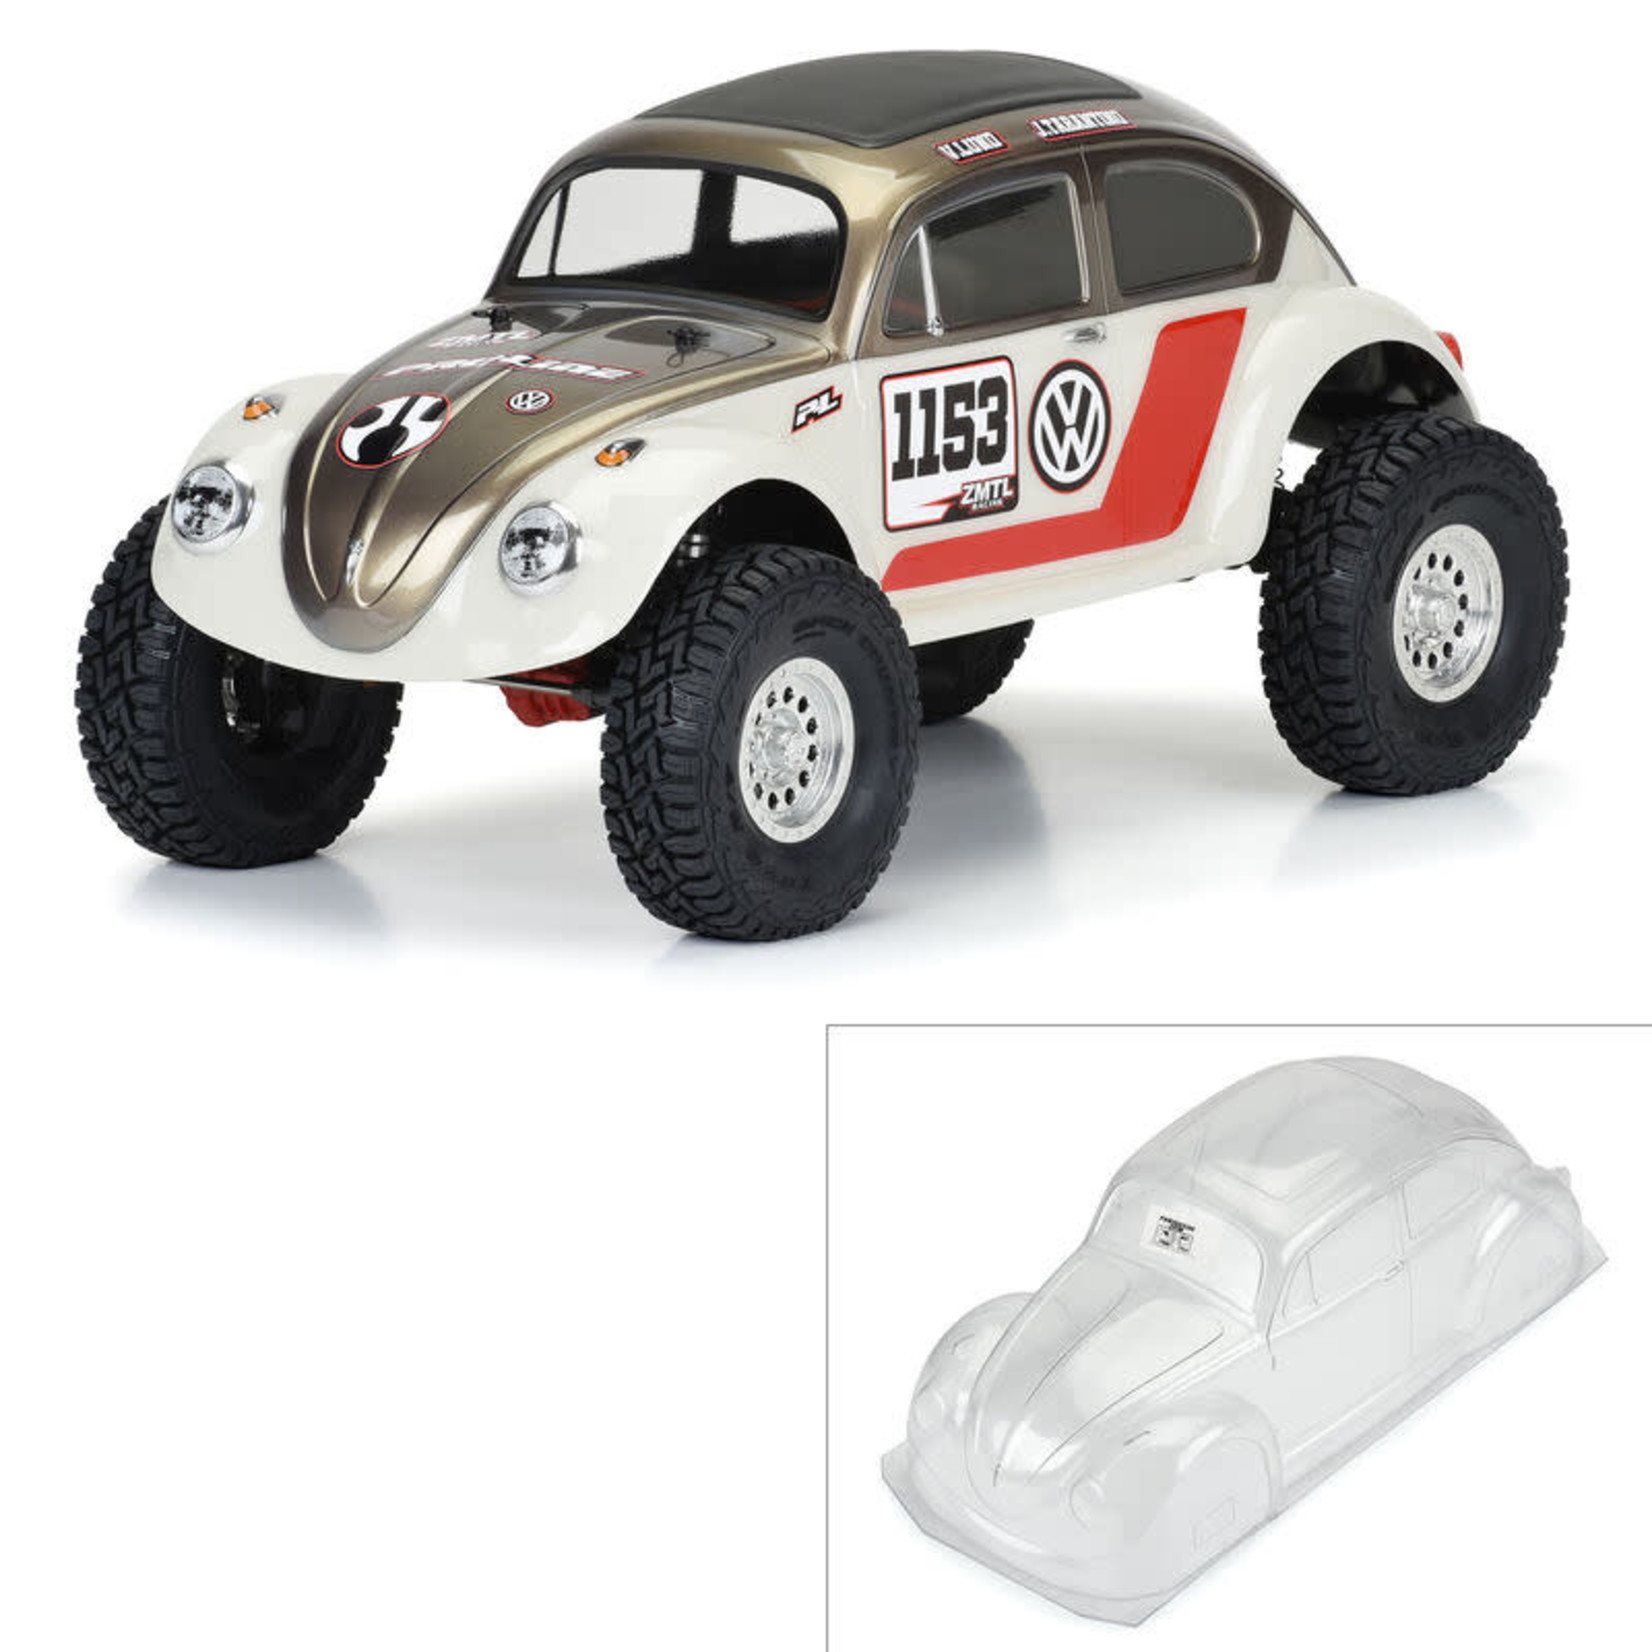 Pro-line Racing PRO359500 Pro-Line VW Beetle Clear Body for 12.3